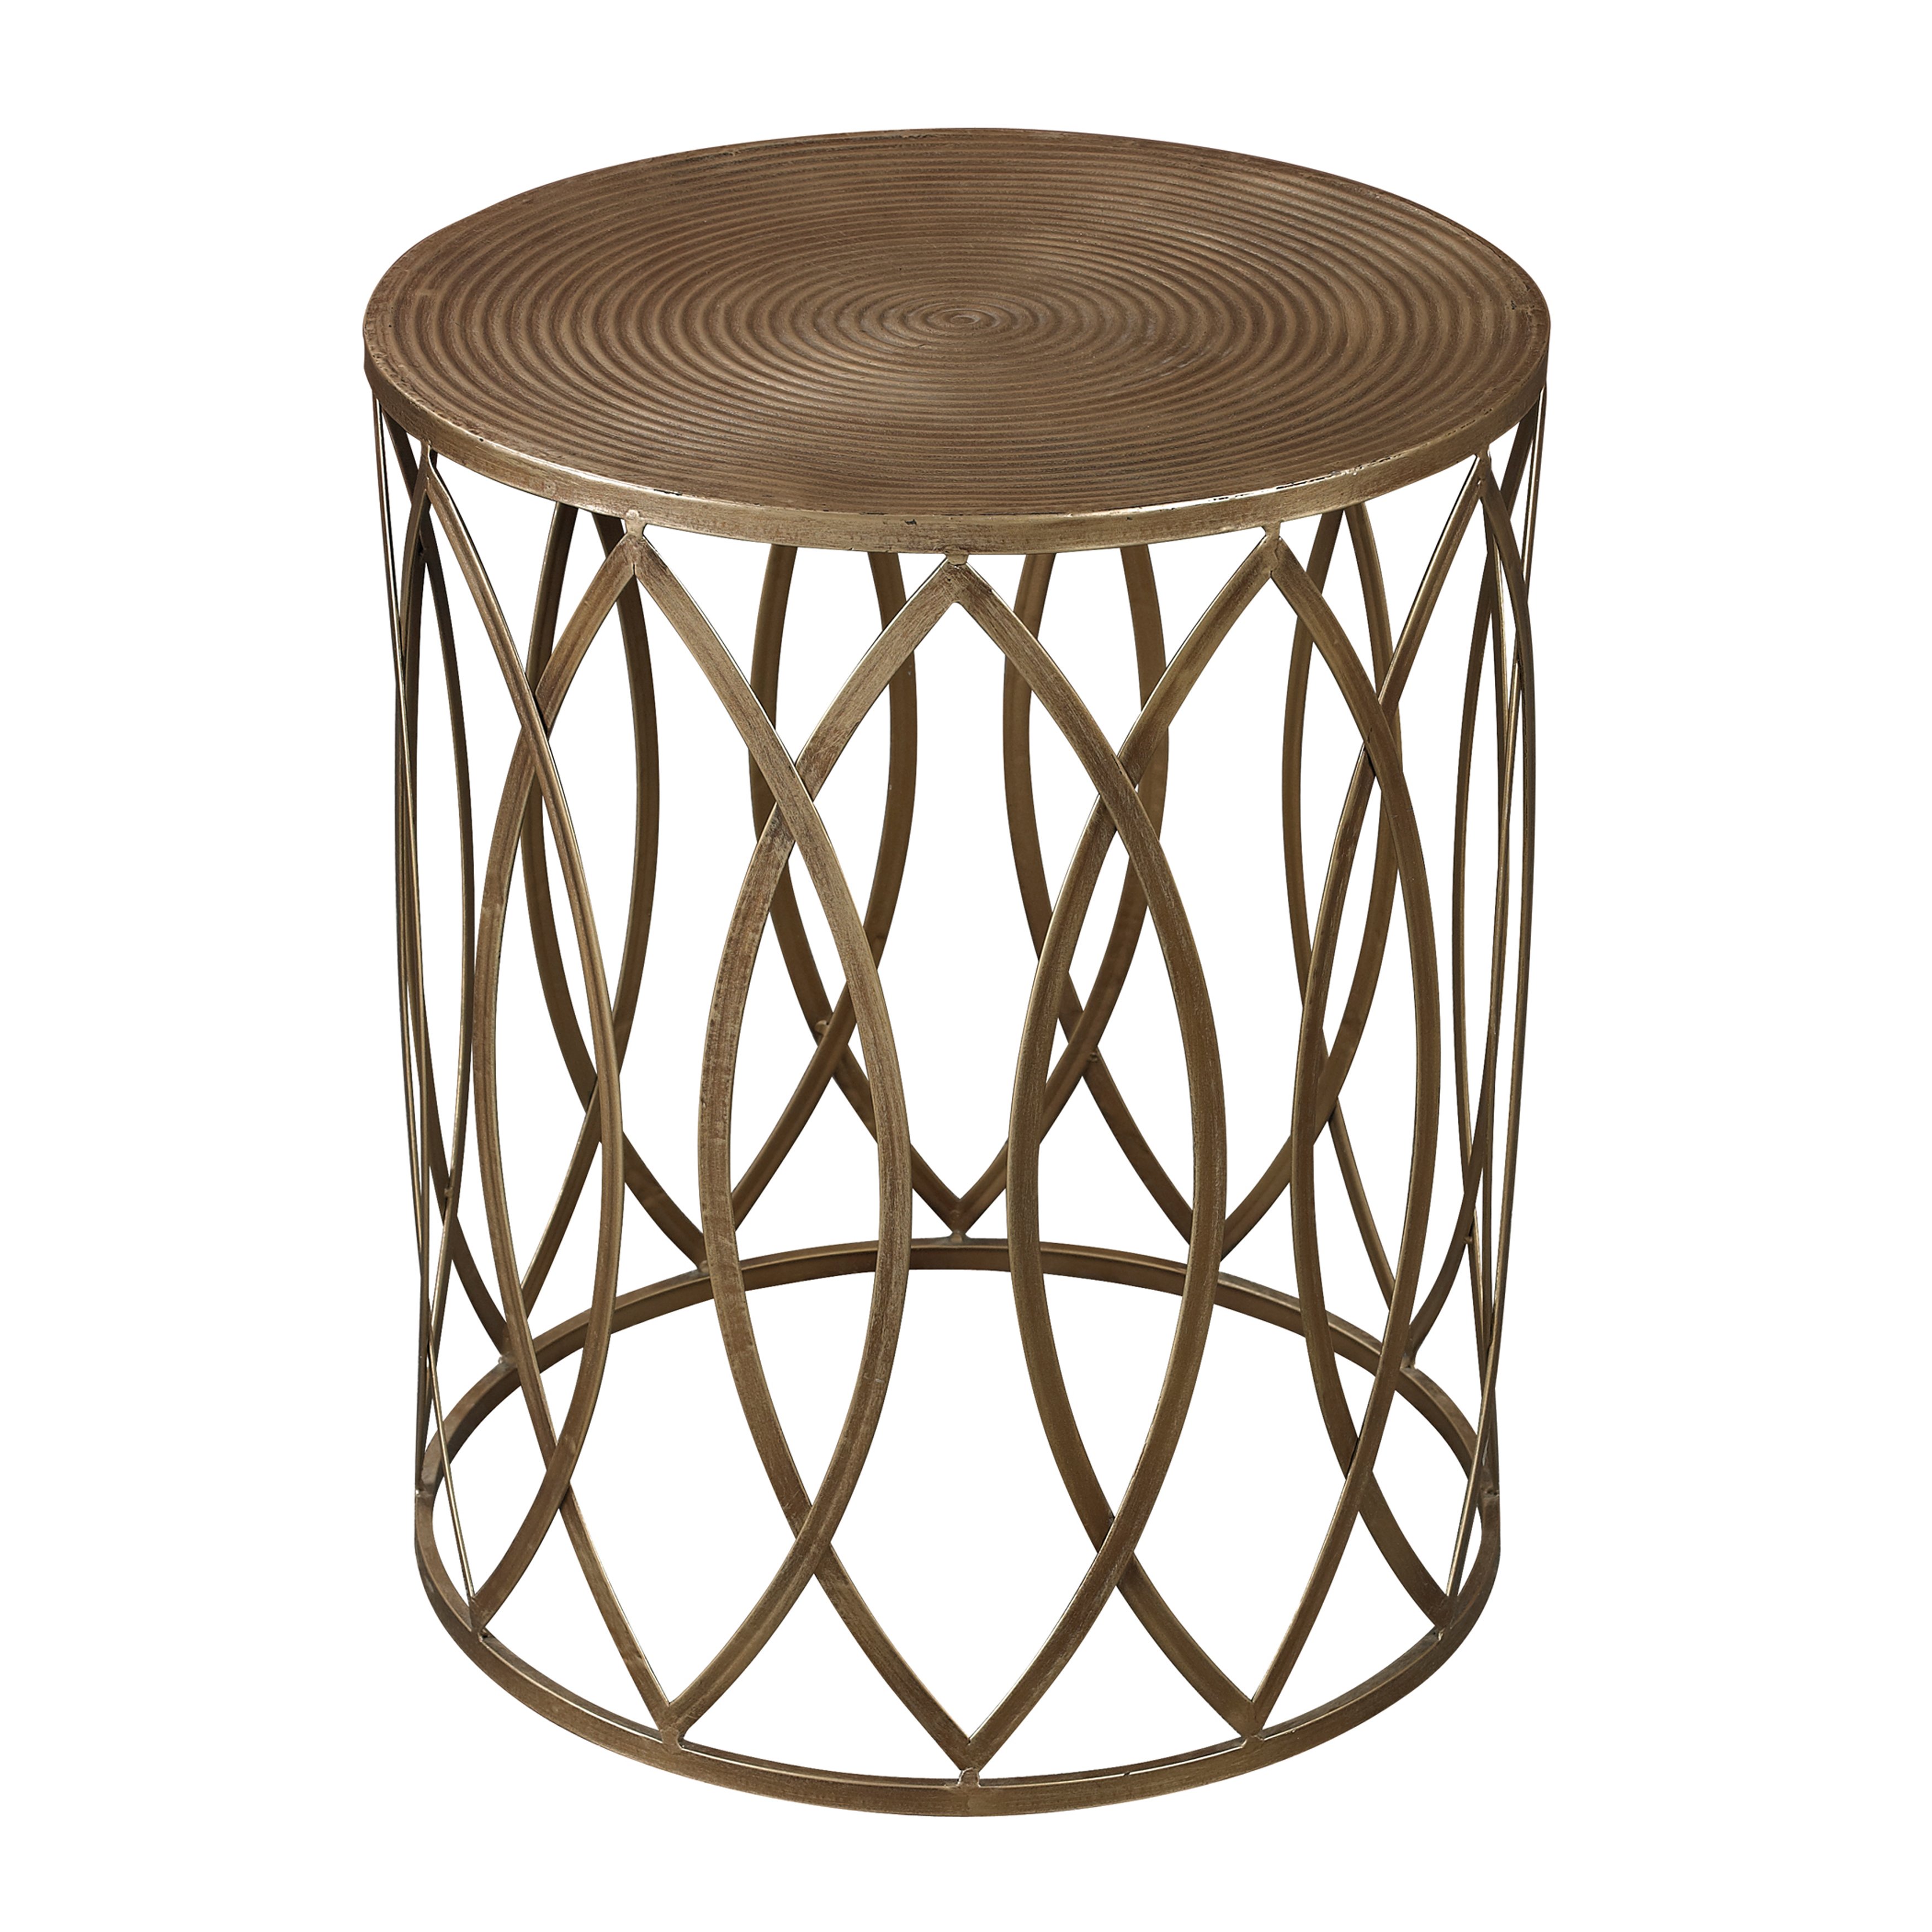 antique gold finish round metal accent table free shipping today timber side counter height dining set rugs large bedside lamps mirage mirrored outdoor patio furniture toronto